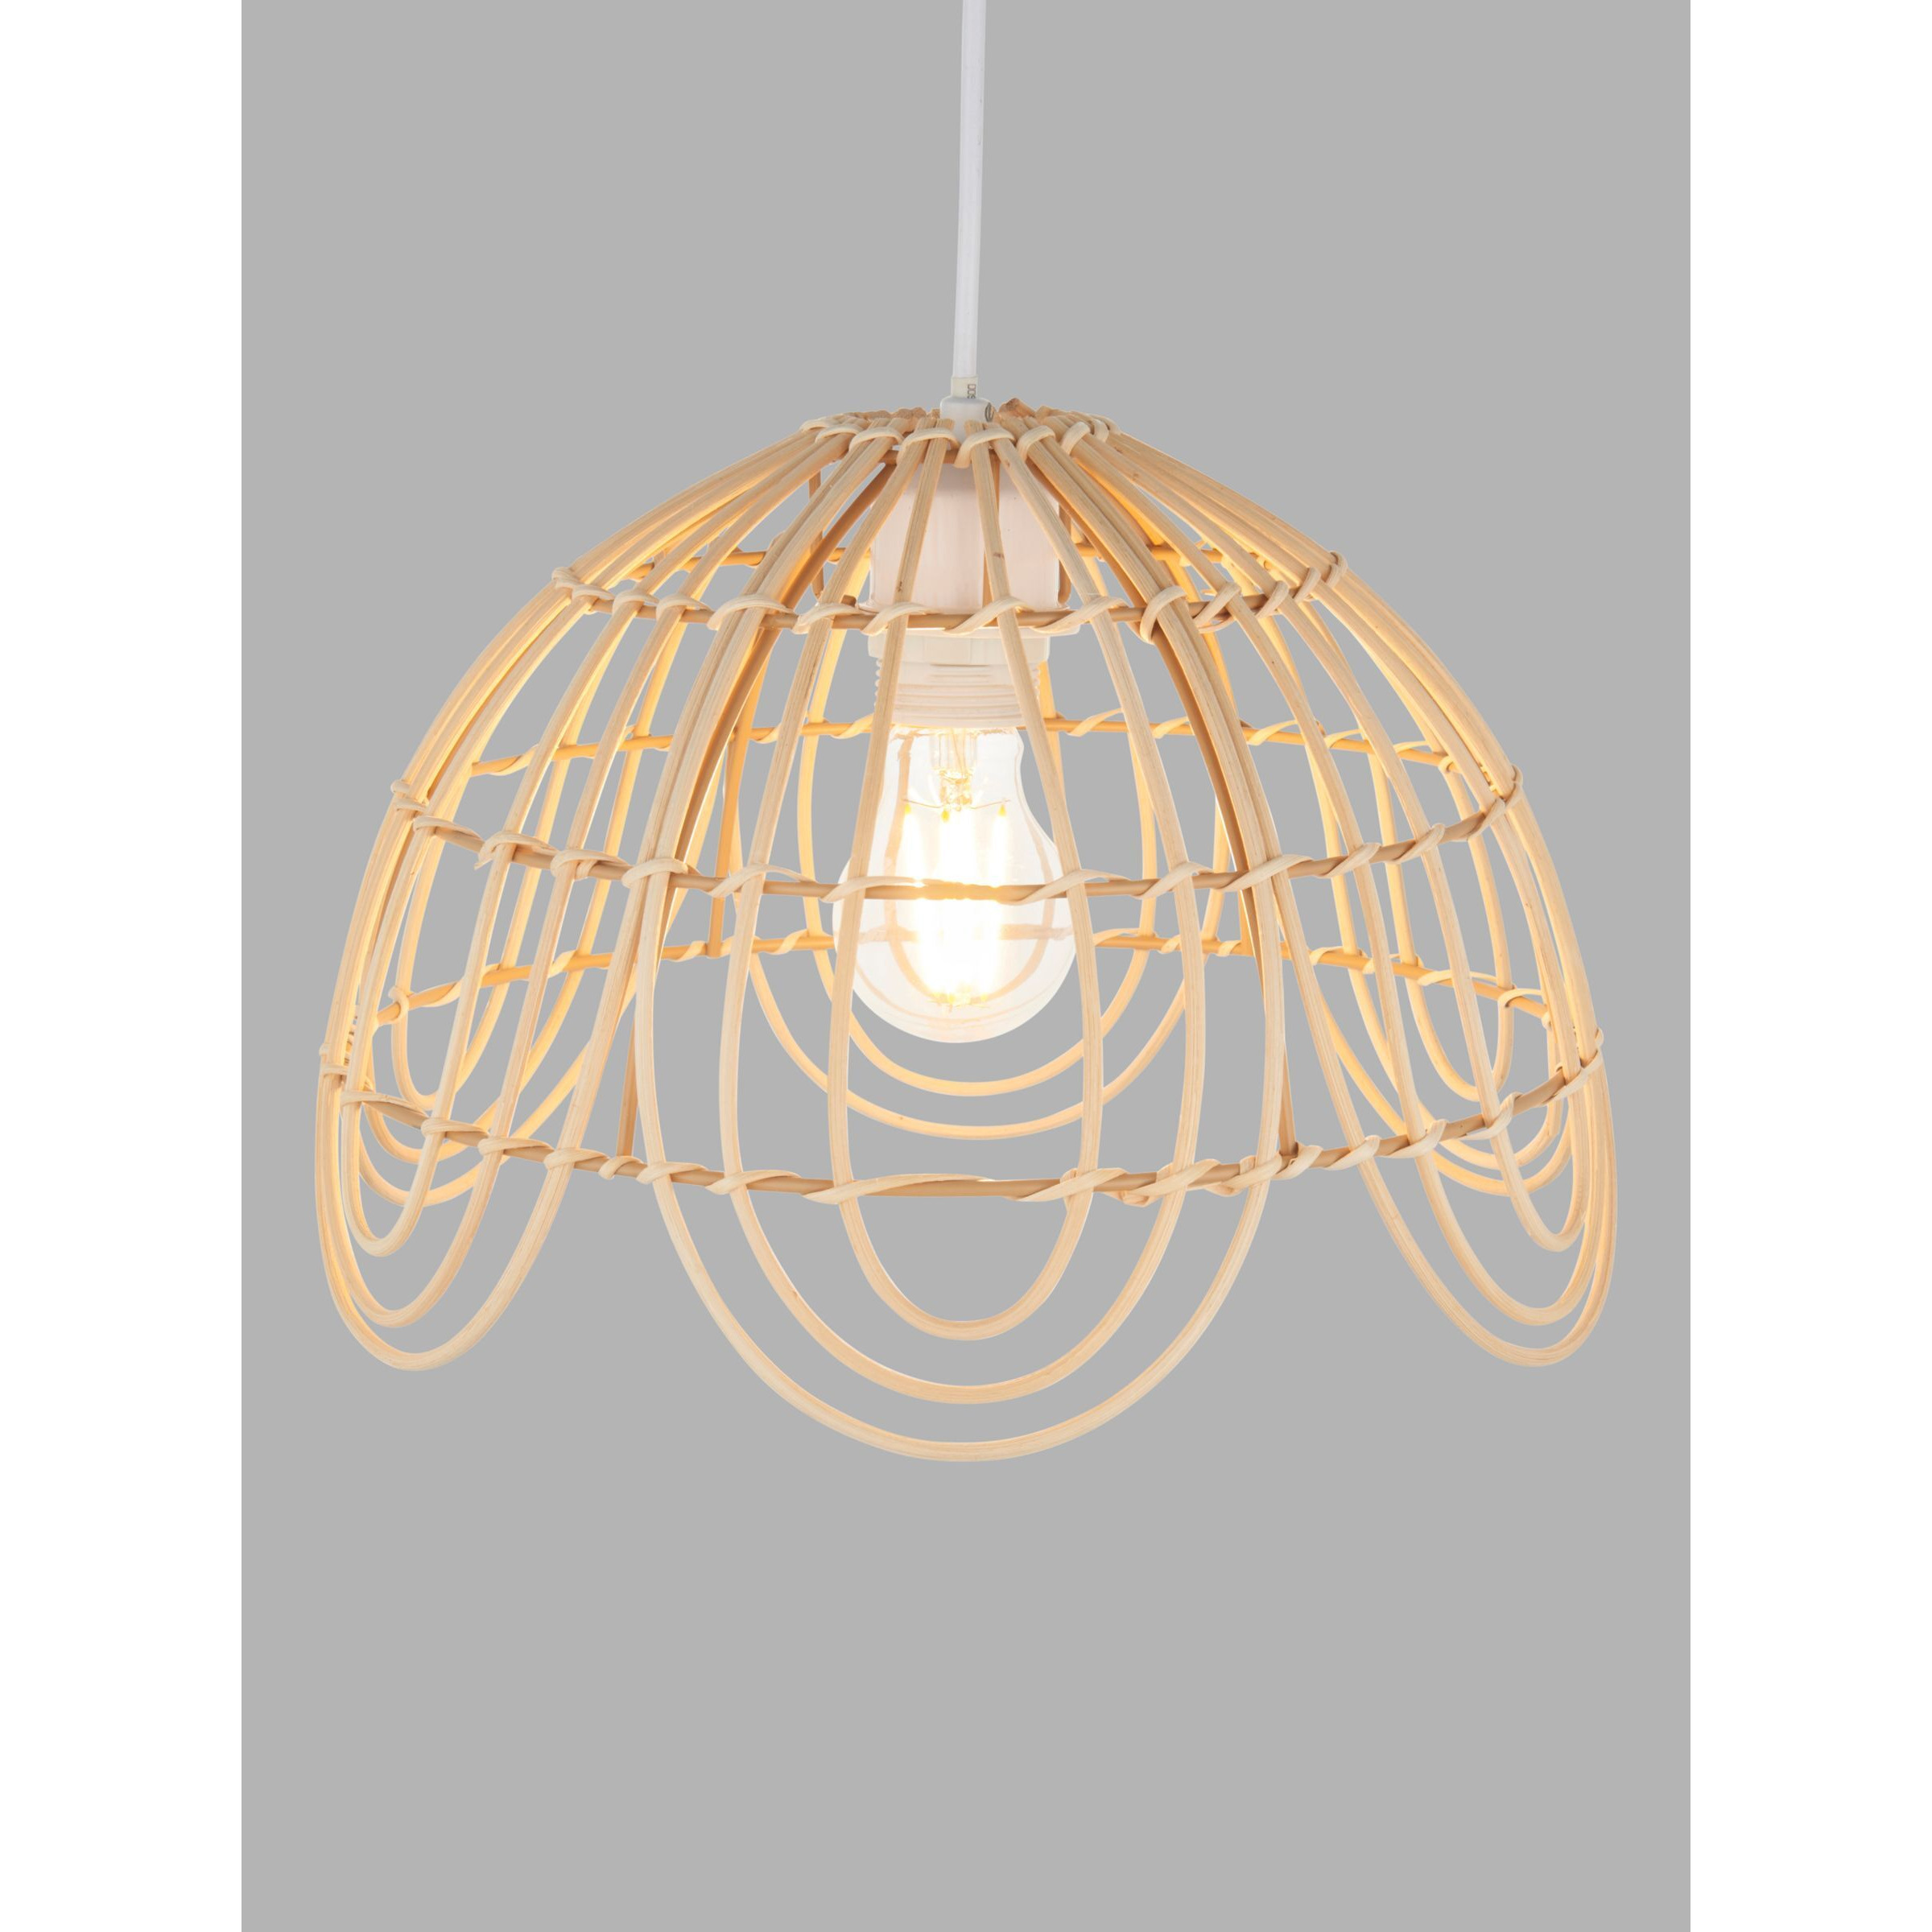 John Lewis Aria Easy-To-Fit Ceiling Shade - image 1